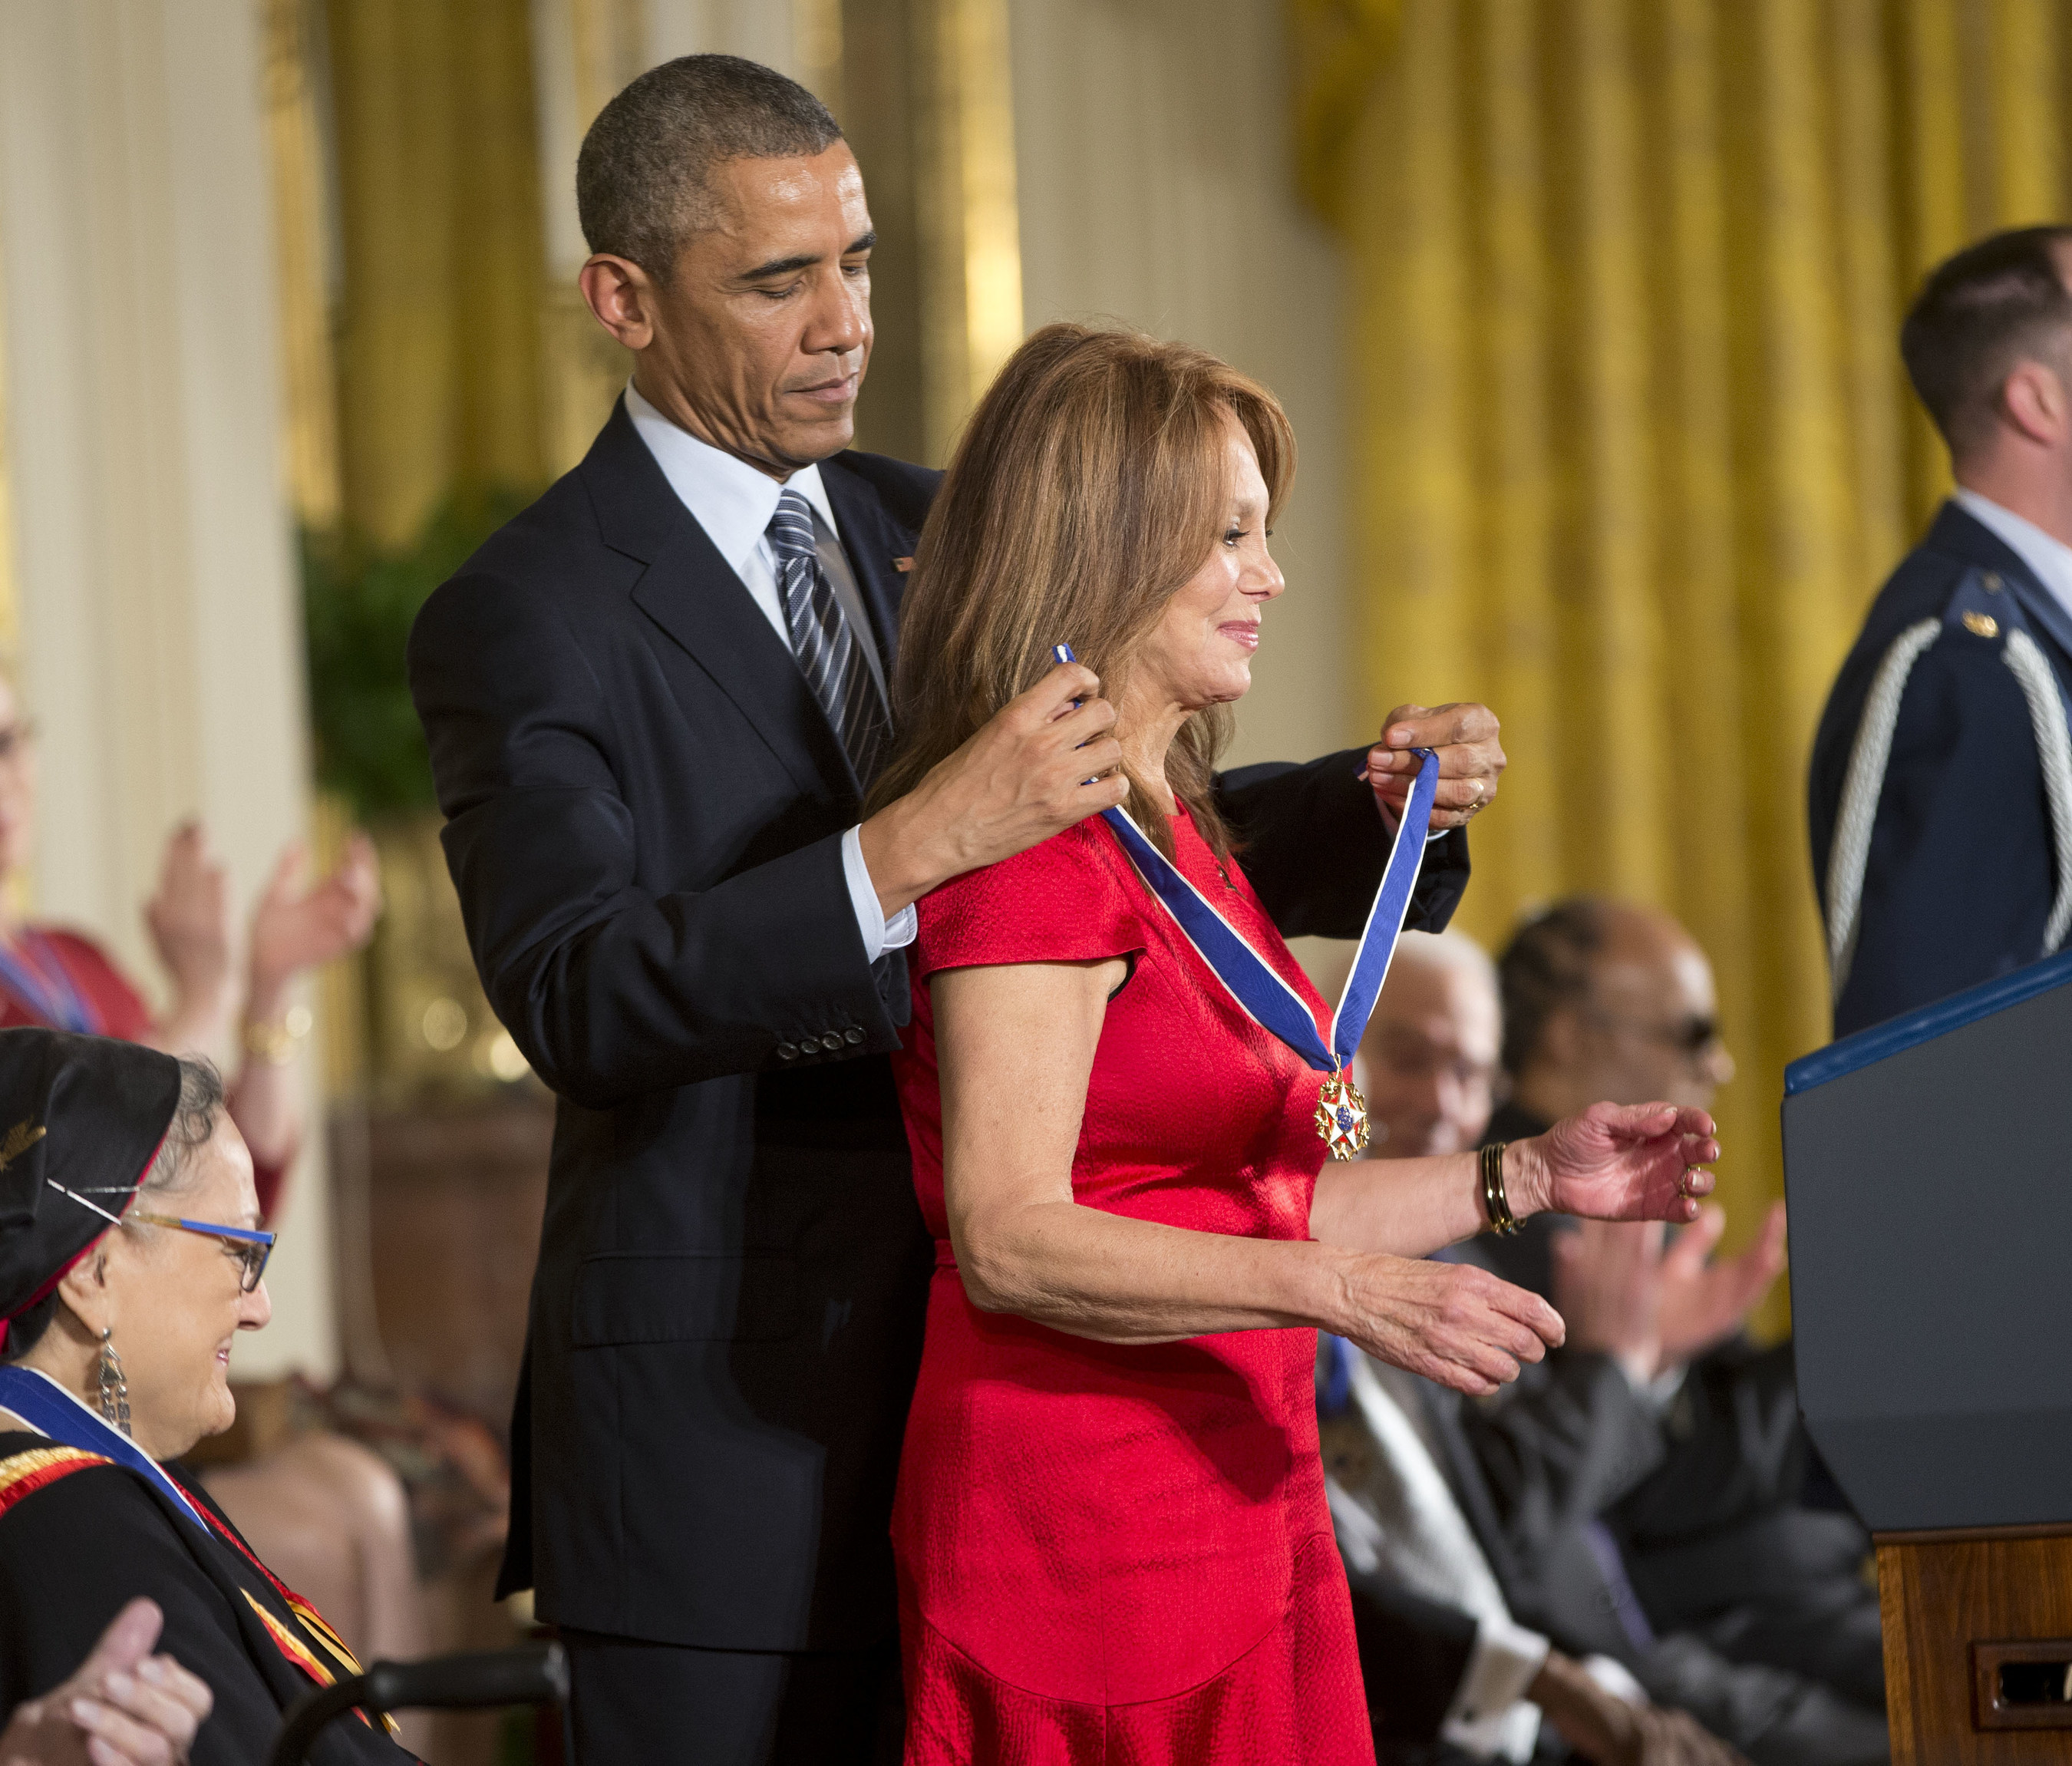 Marlo Thomas, National Outreach Director for St. Jude Children's Research Hospital(R), receives the Nation's Highest Civilian Honor for Her Tireless Efforts on Behalf of Women and Girls, and for Her Leading Role in the Fight Against Childhood Cancer. (AP Photo/Pablo Martinez Monsivais)